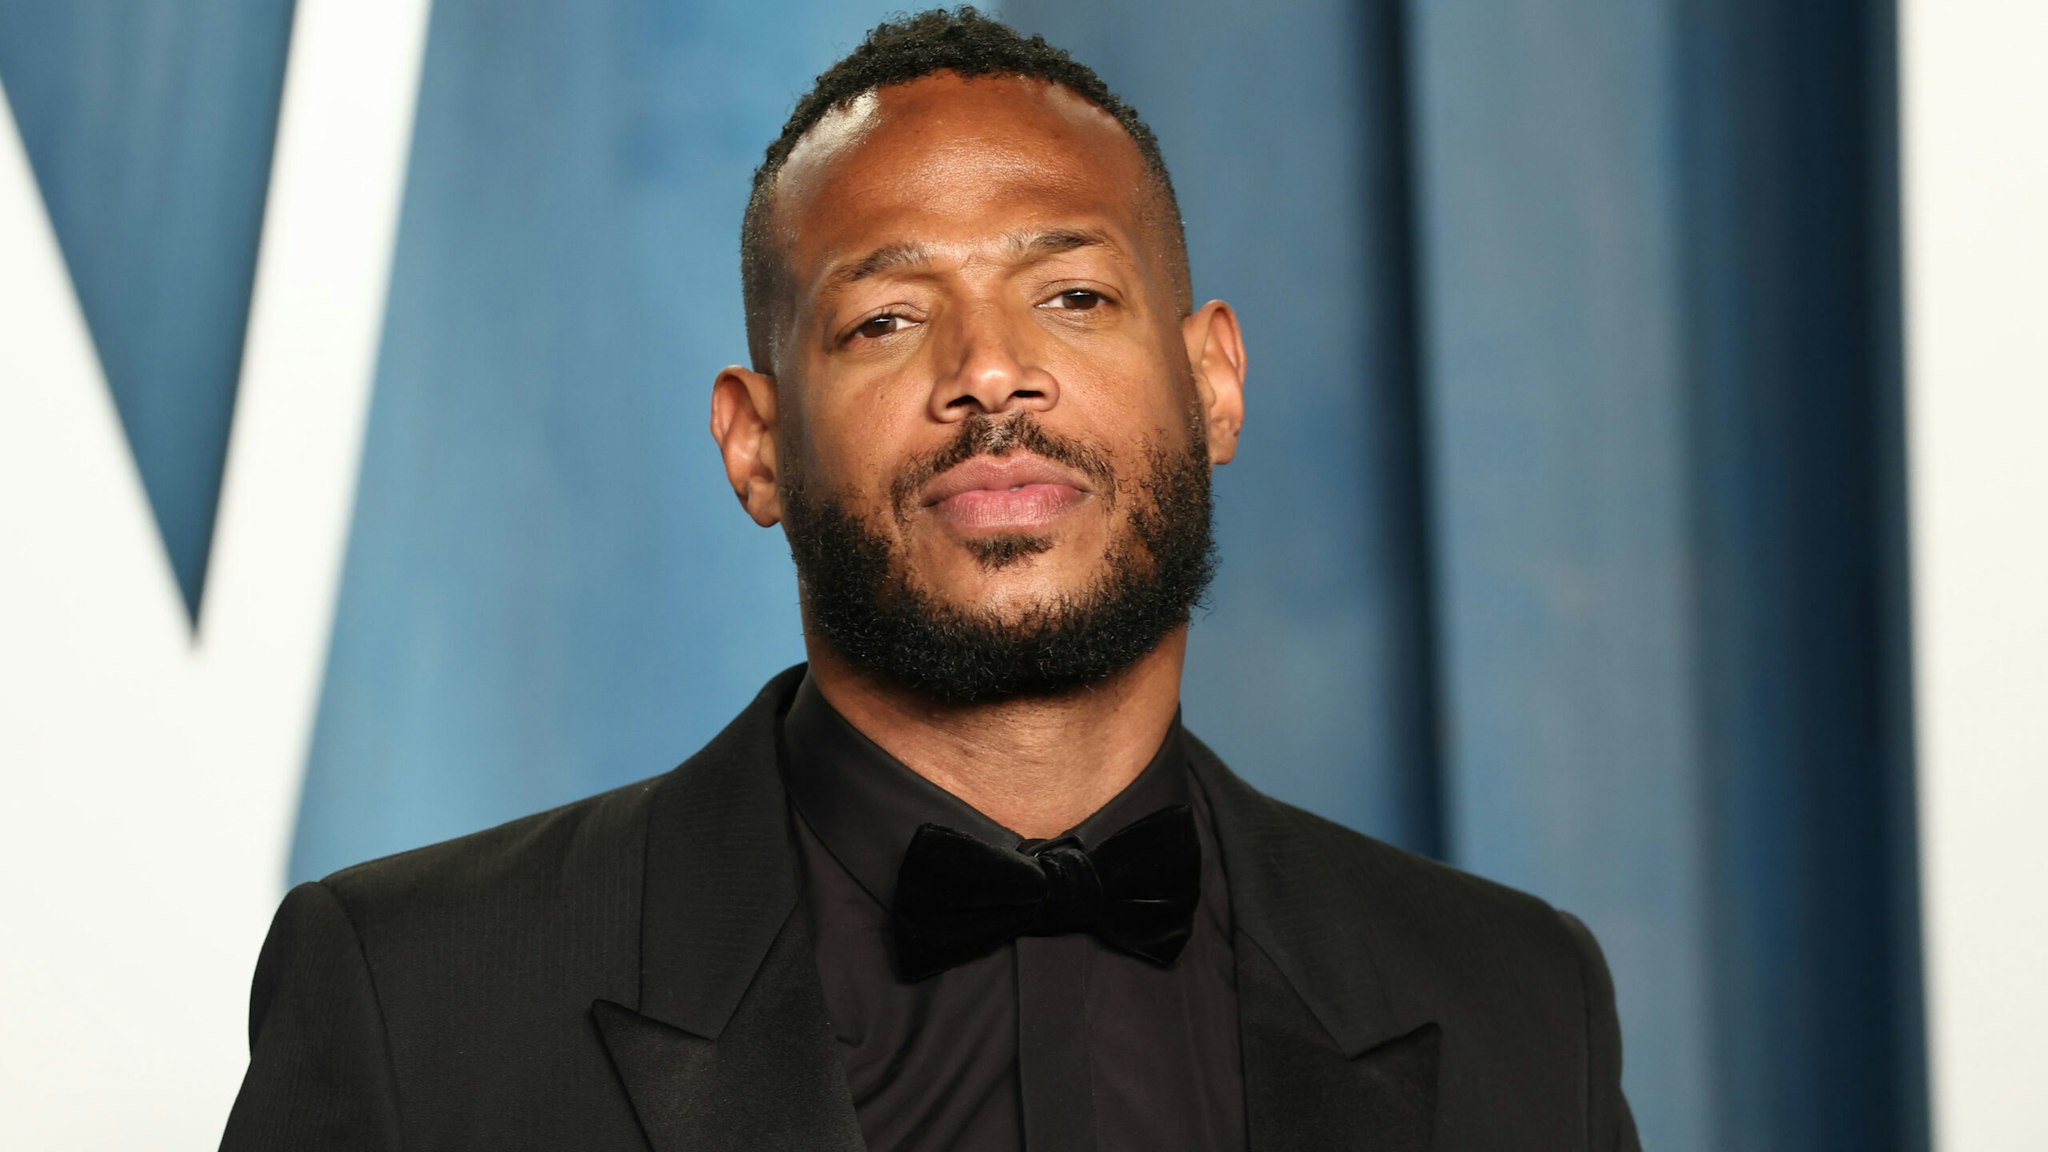 BEVERLY HILLS, CALIFORNIA - MARCH 27: Marlon Wayans attends the 2022 Vanity Fair Oscar Party hosted by Radhika Jones at Wallis Annenberg Center for the Performing Arts on March 27, 2022 in Beverly Hills, California.